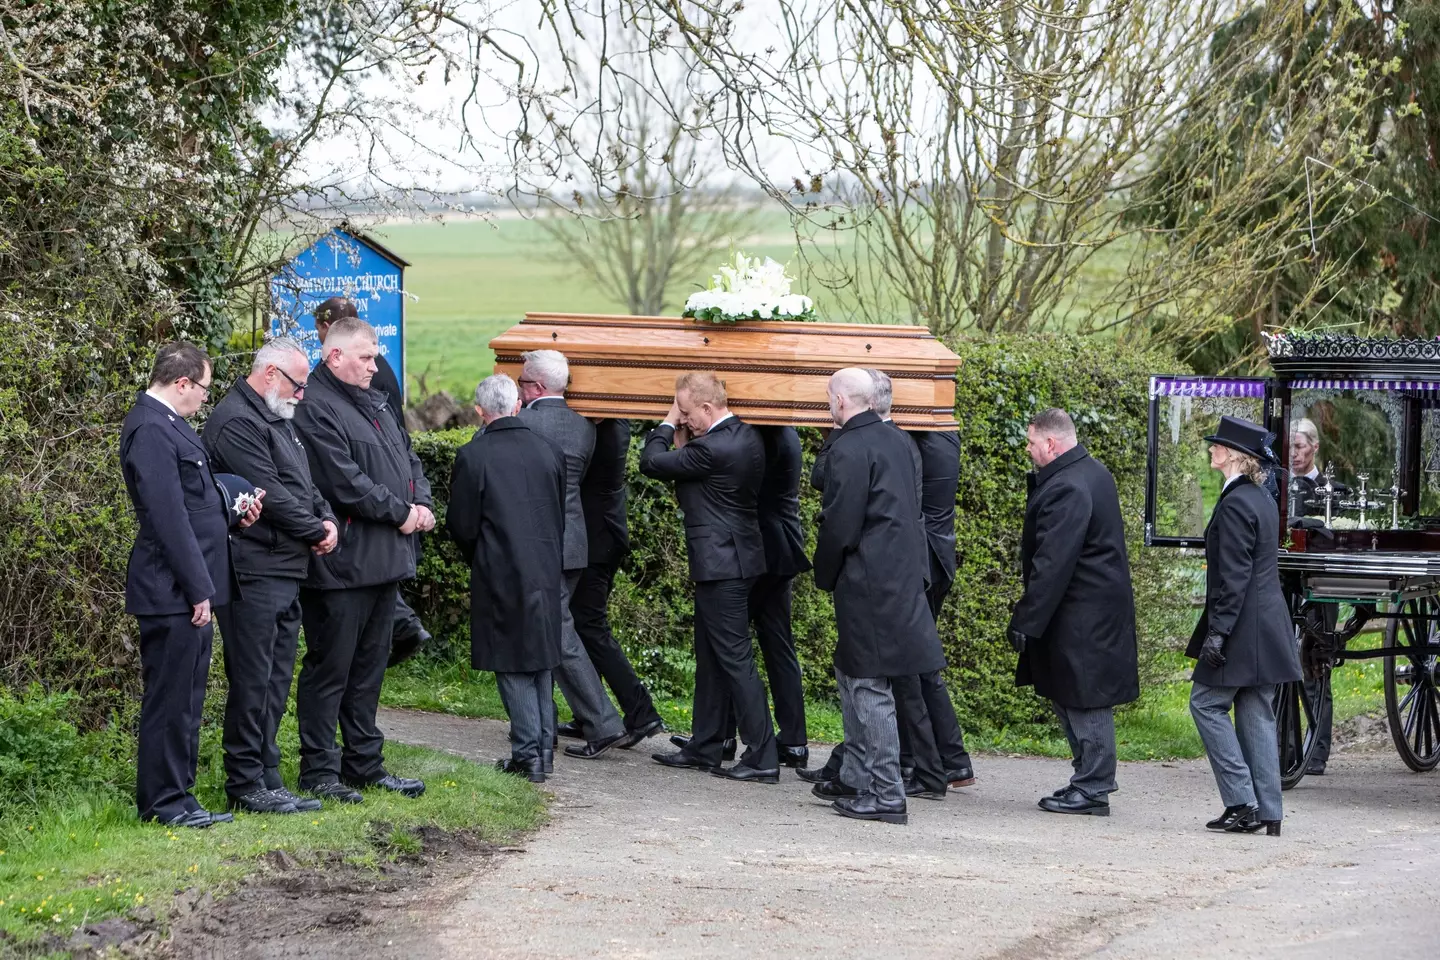 His funeral was a private ceremony held at St Rumwold’s Church, Bonnington in Kent